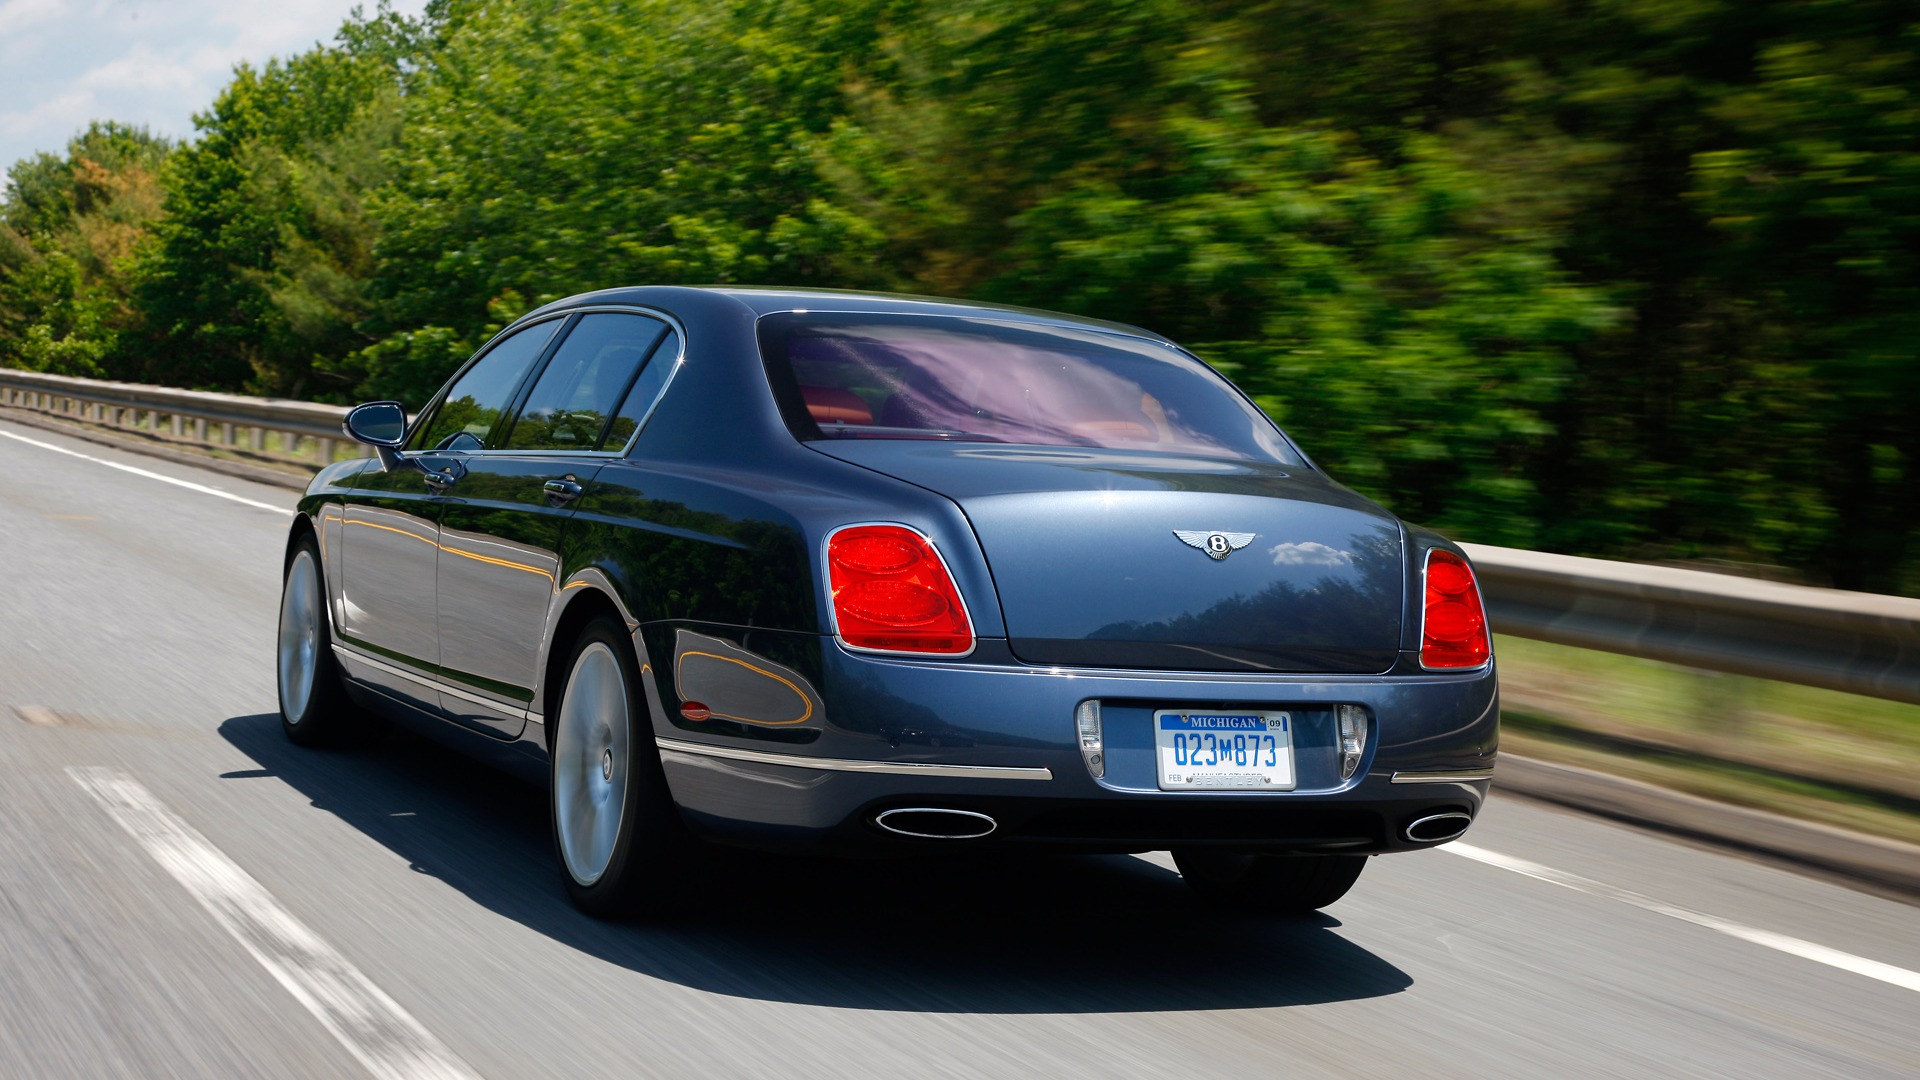 Bentley Continental Flying Spur Speed - 2008 宾利12 - 1920x1080